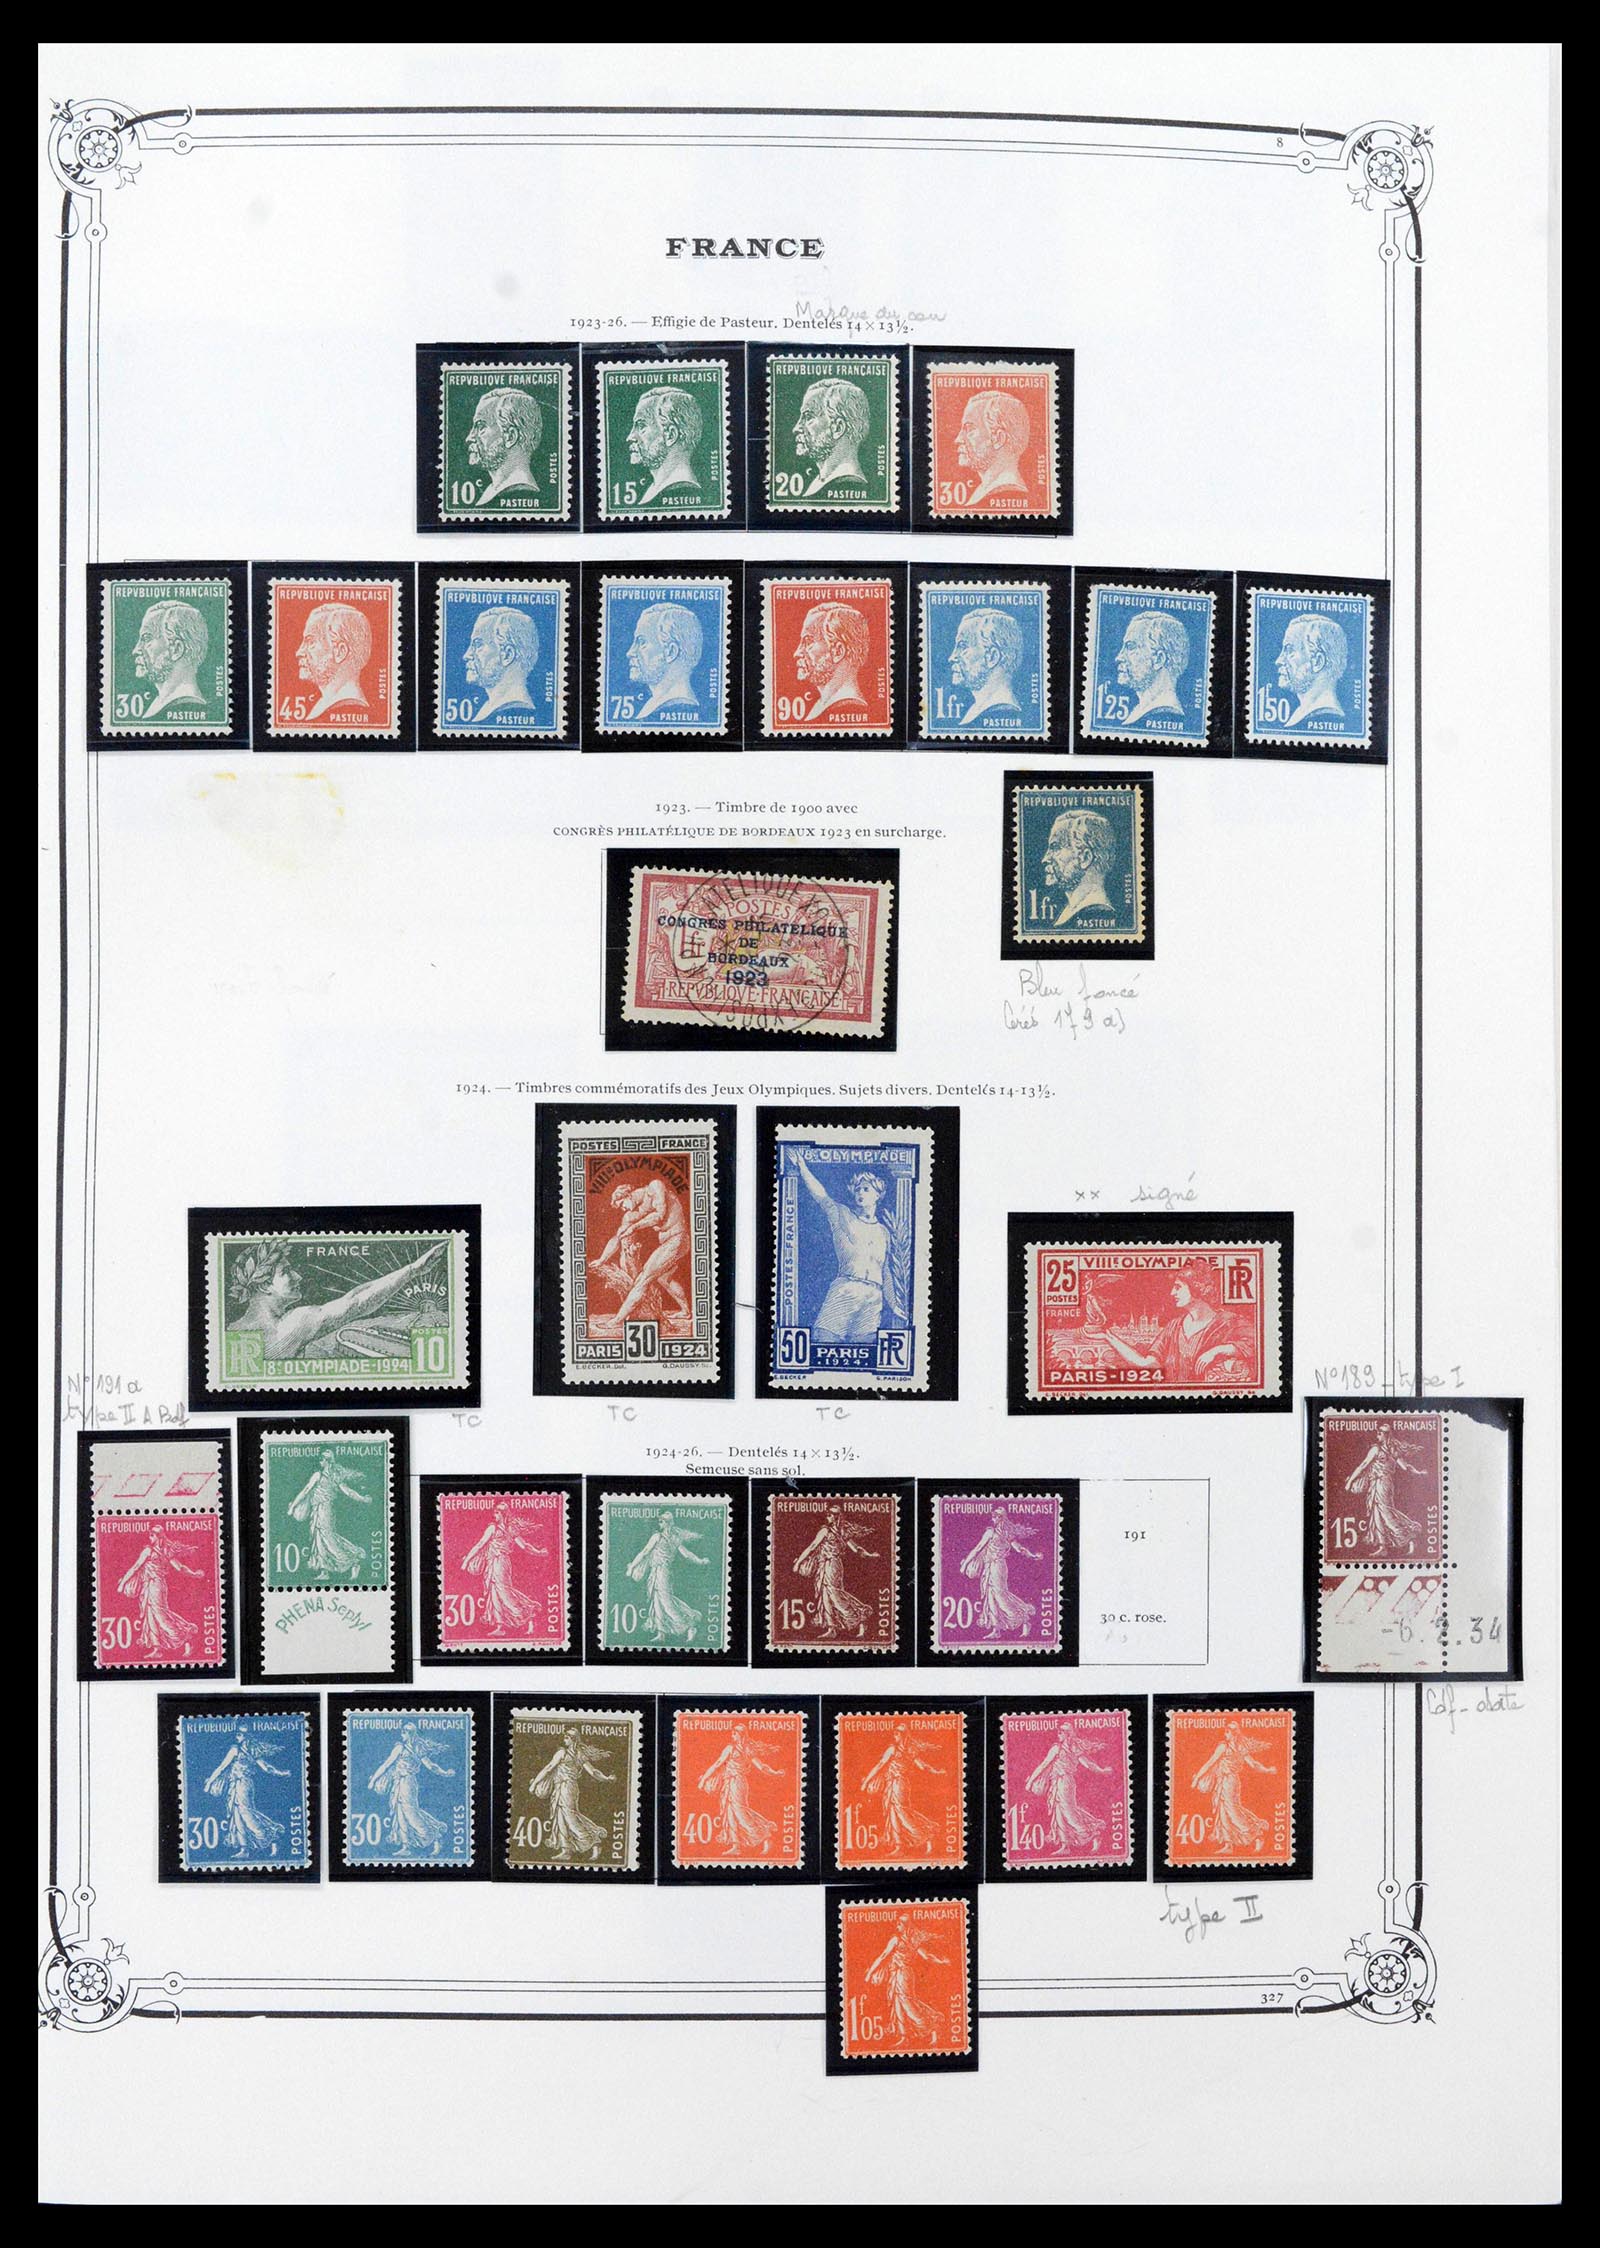 39105 0014 - Stamp collection 39105 France 1849-1955.